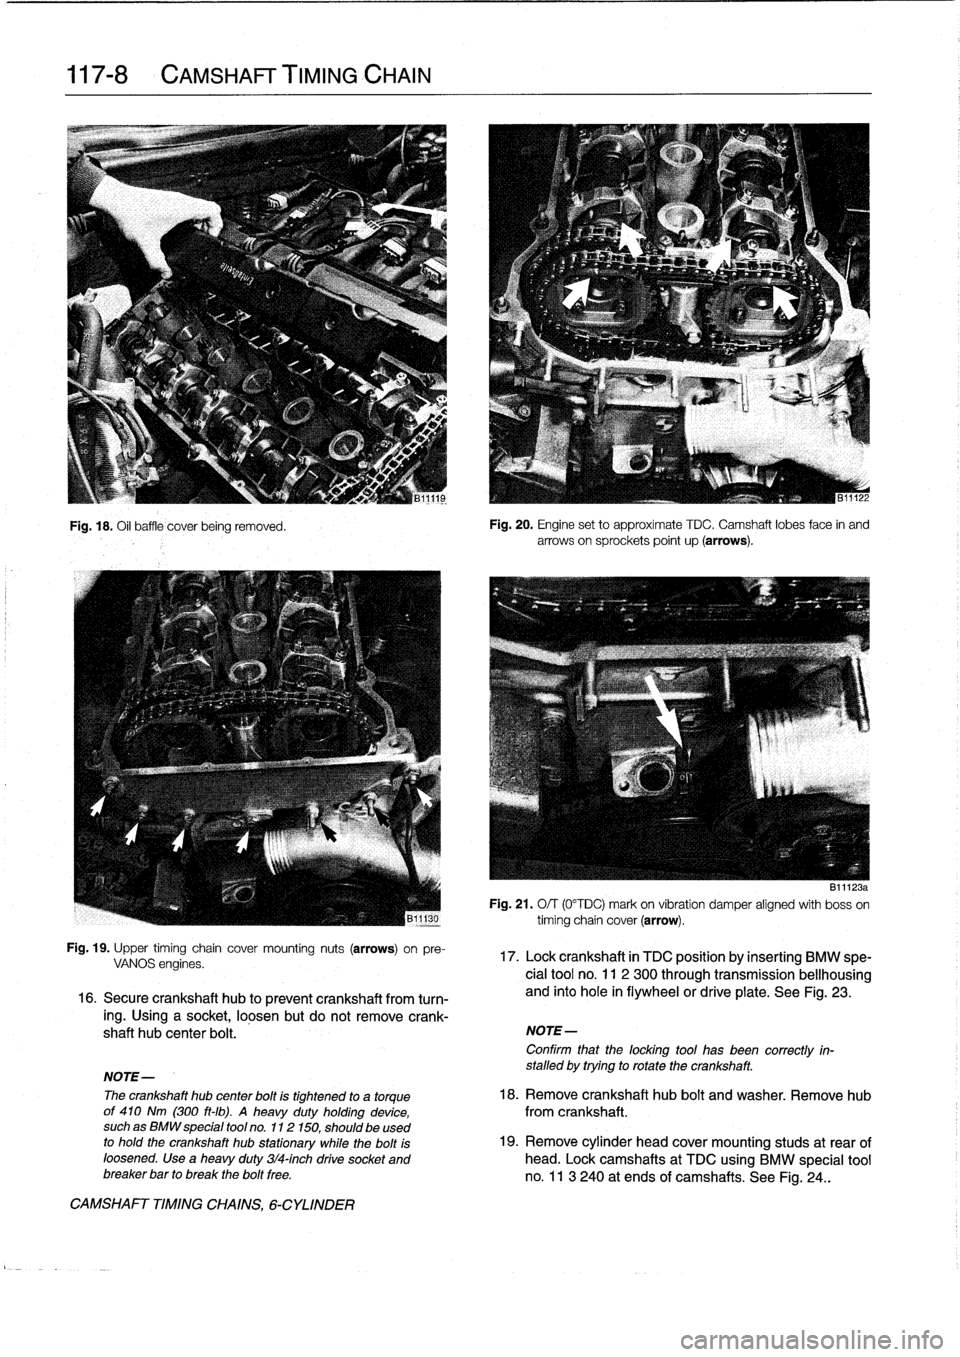 BMW M3 1993 E36 Workshop Manual 
117-
8

	

CAMSHAFT
TIMING
CHAIN

Fig
.
18
.
Oil
baffle
cover
being
removed
.

Fig
.
19
.
Upper
timing
chaincover
mounting
nuts
(arrows)
on
pre-
VANOS
engines
.

16
.
Secure
crankshaft
hub
to
preven